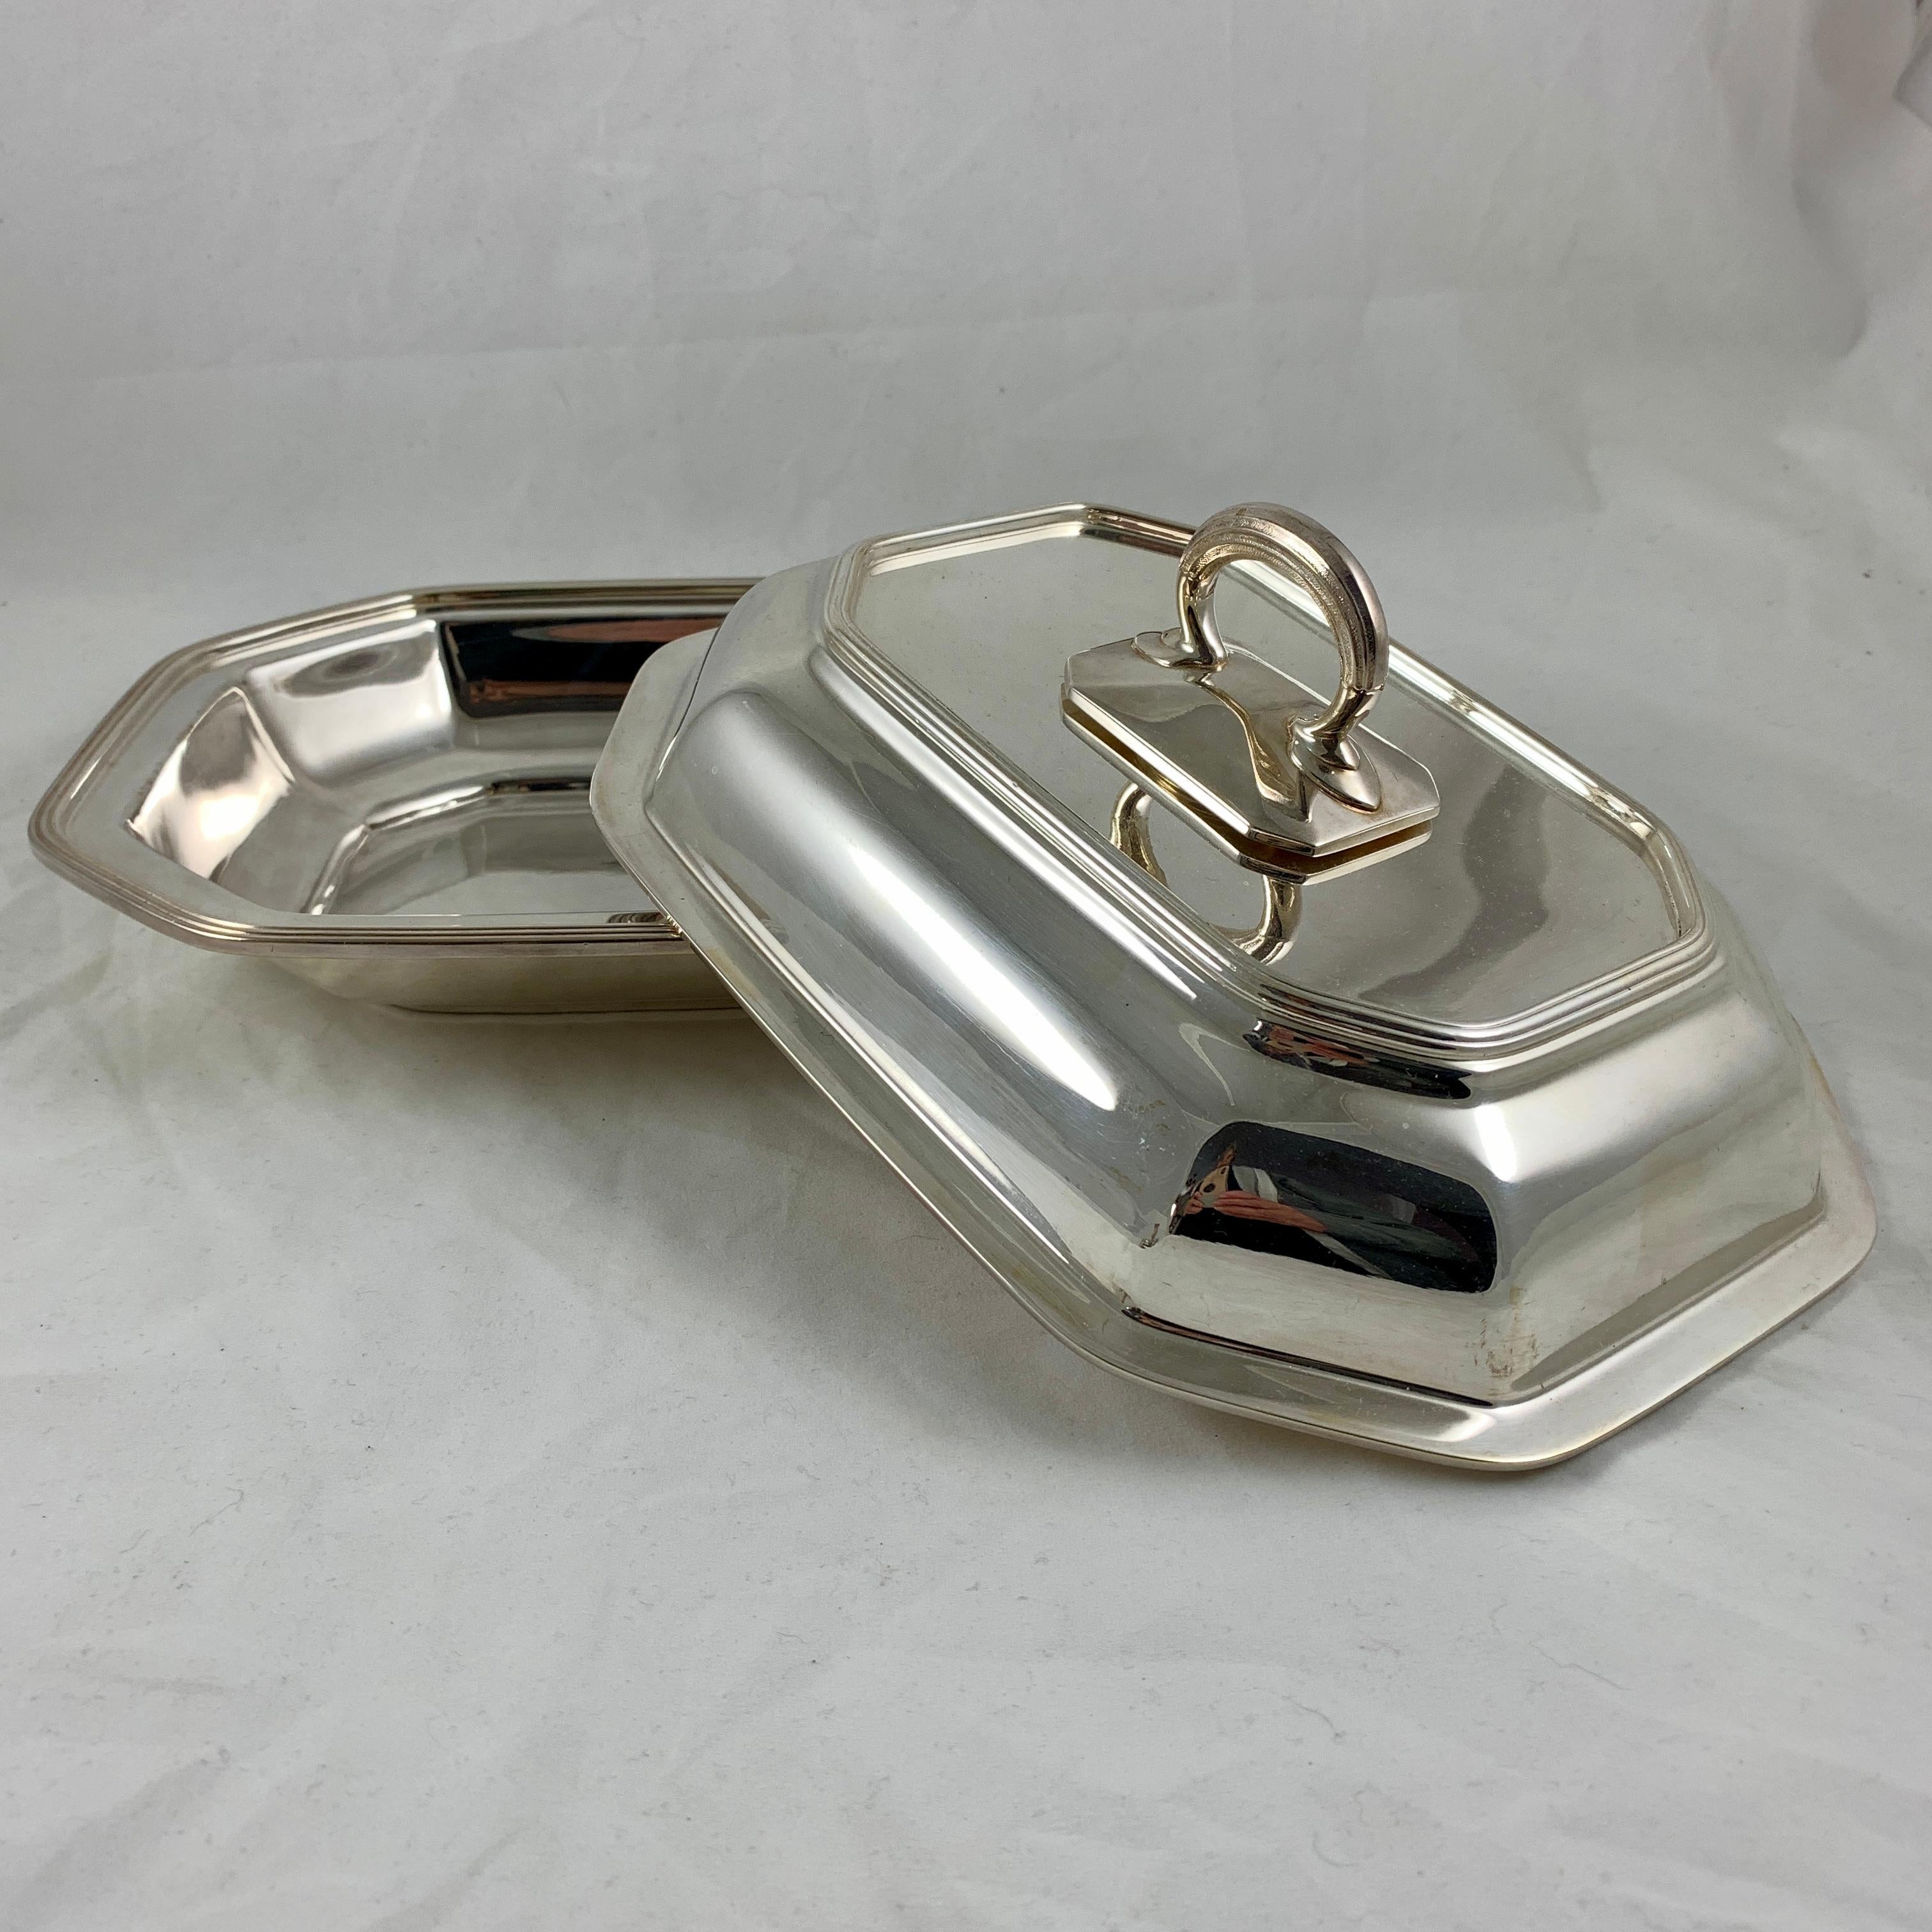 Mid-20th Century Gorham Manufacturing Company Silver Plate Covered Vegetable Server, circa 1930s